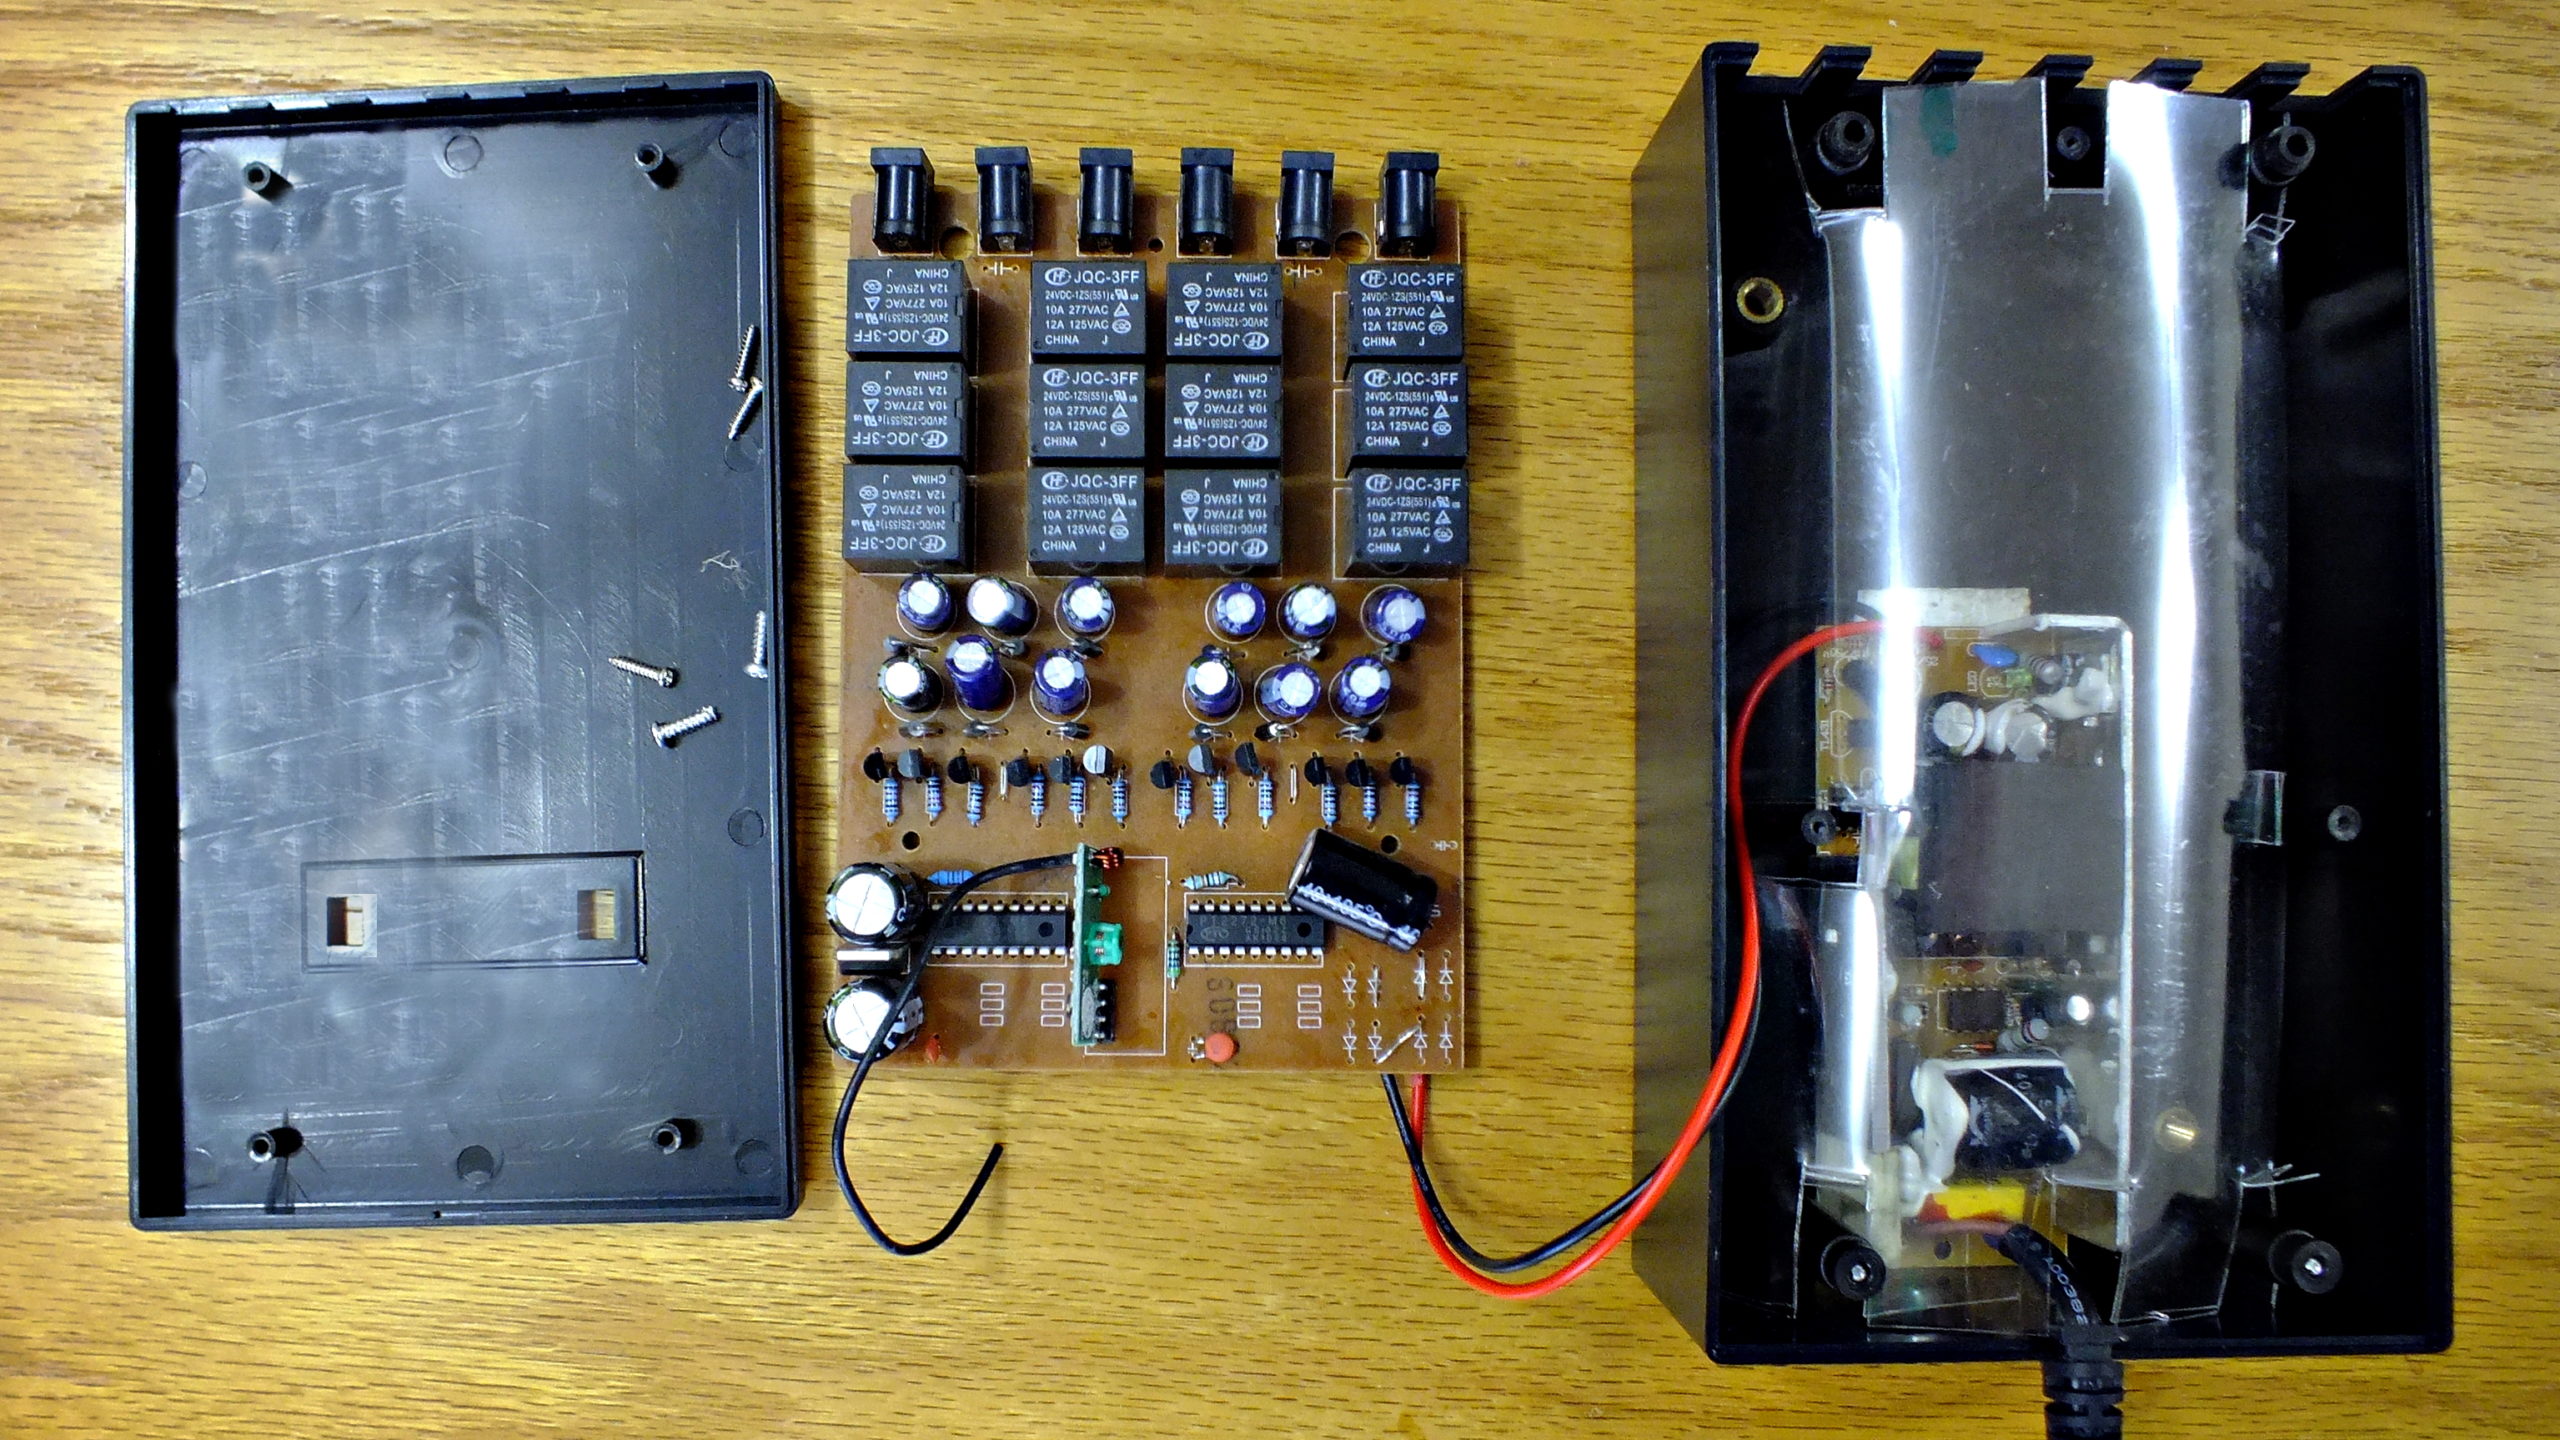 Control unit. Left: lid and cabinet screws. Centre: RF and relay board in the centre; Right: 230 VAC to 24 VDC switch mode power supply already fitted black ABS cabinet.